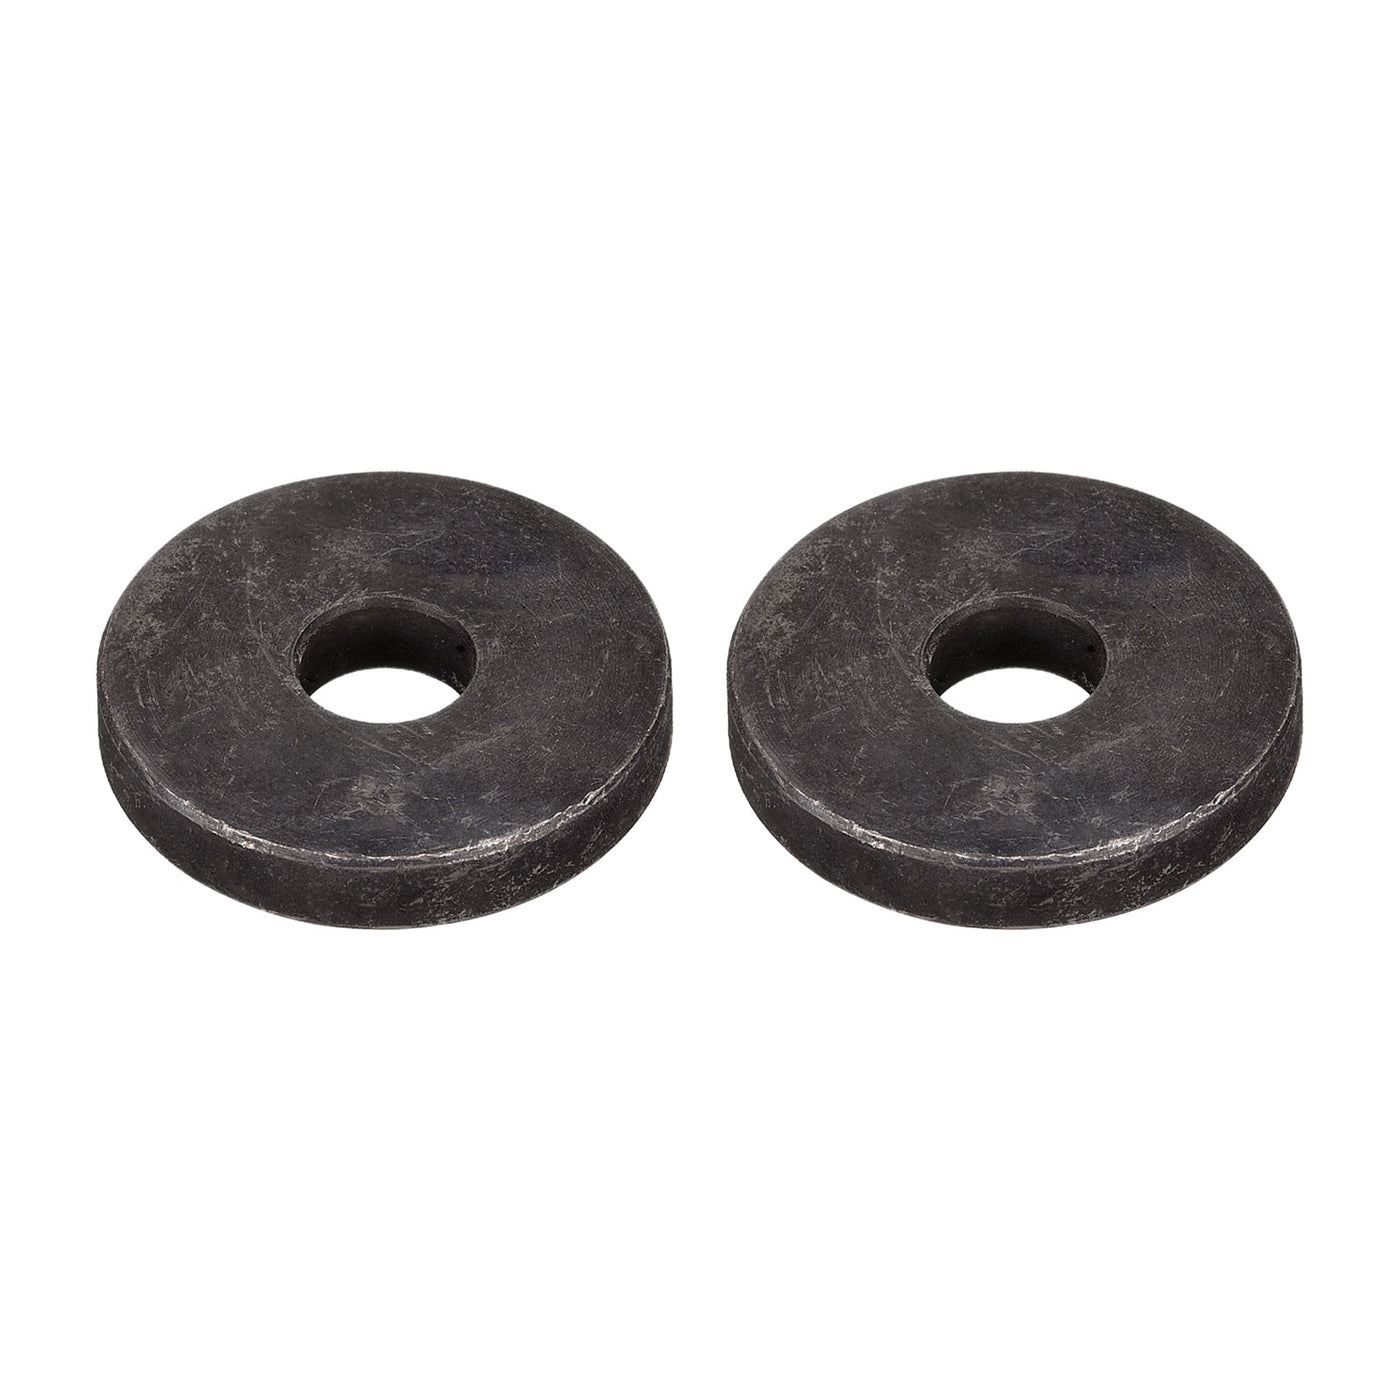 uxcell Uxcell M12 Carbon Steel Flat Washer 2pcs 12.5x41x7mm Grade 8.8 Alloy Steel Fasteners